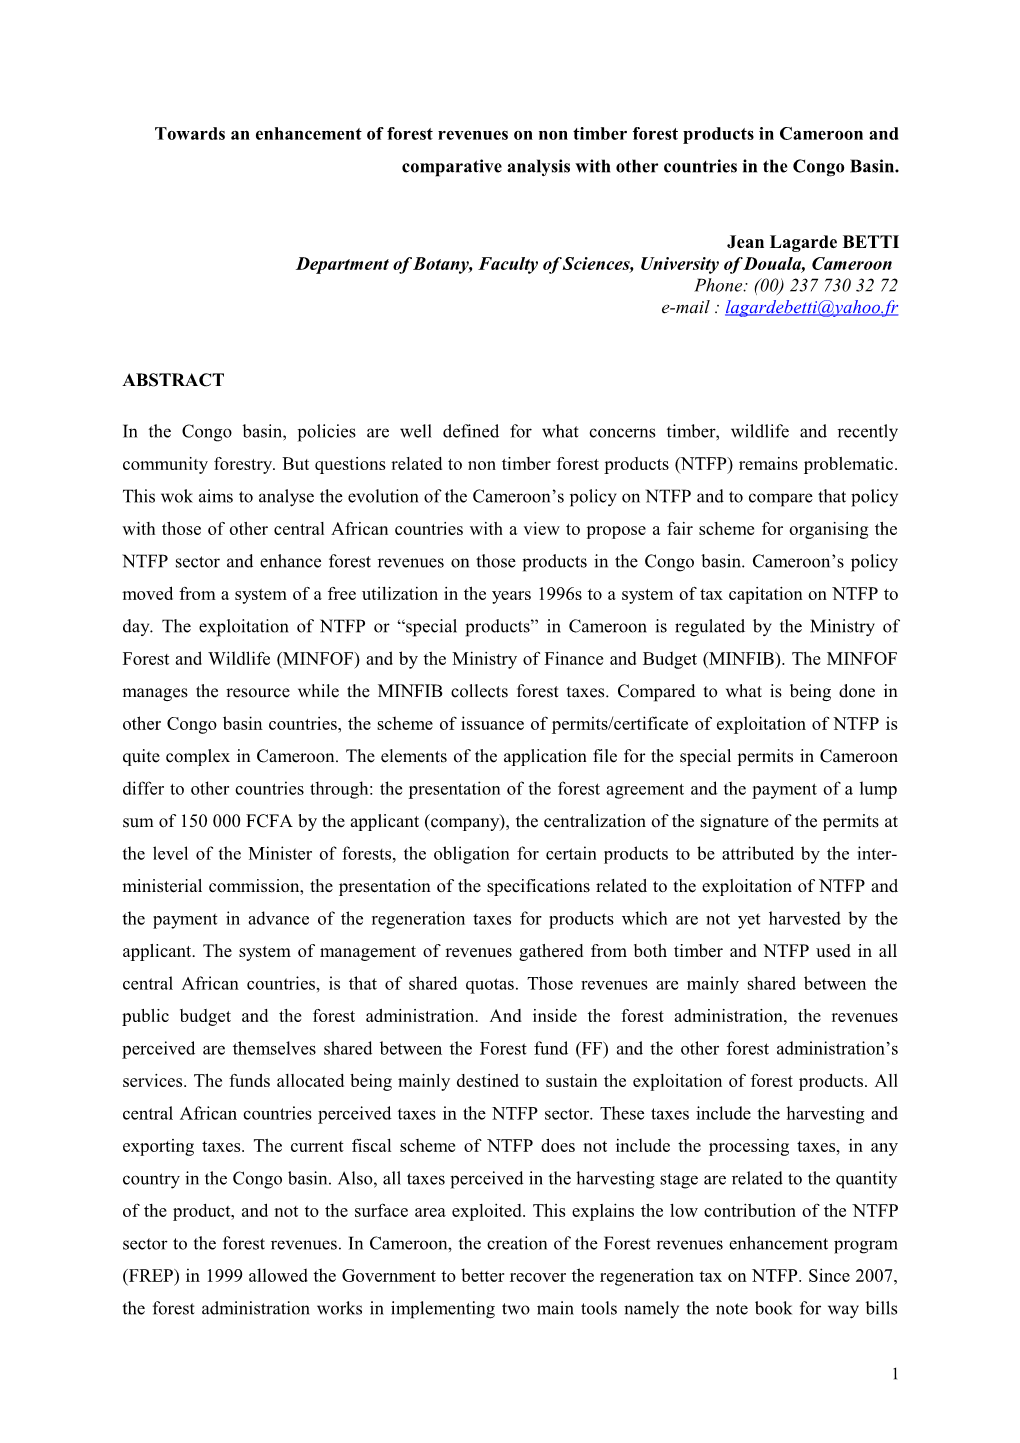 Perspectives of an Appropriated Tax System for Sustaining Non Timber Forest Products In